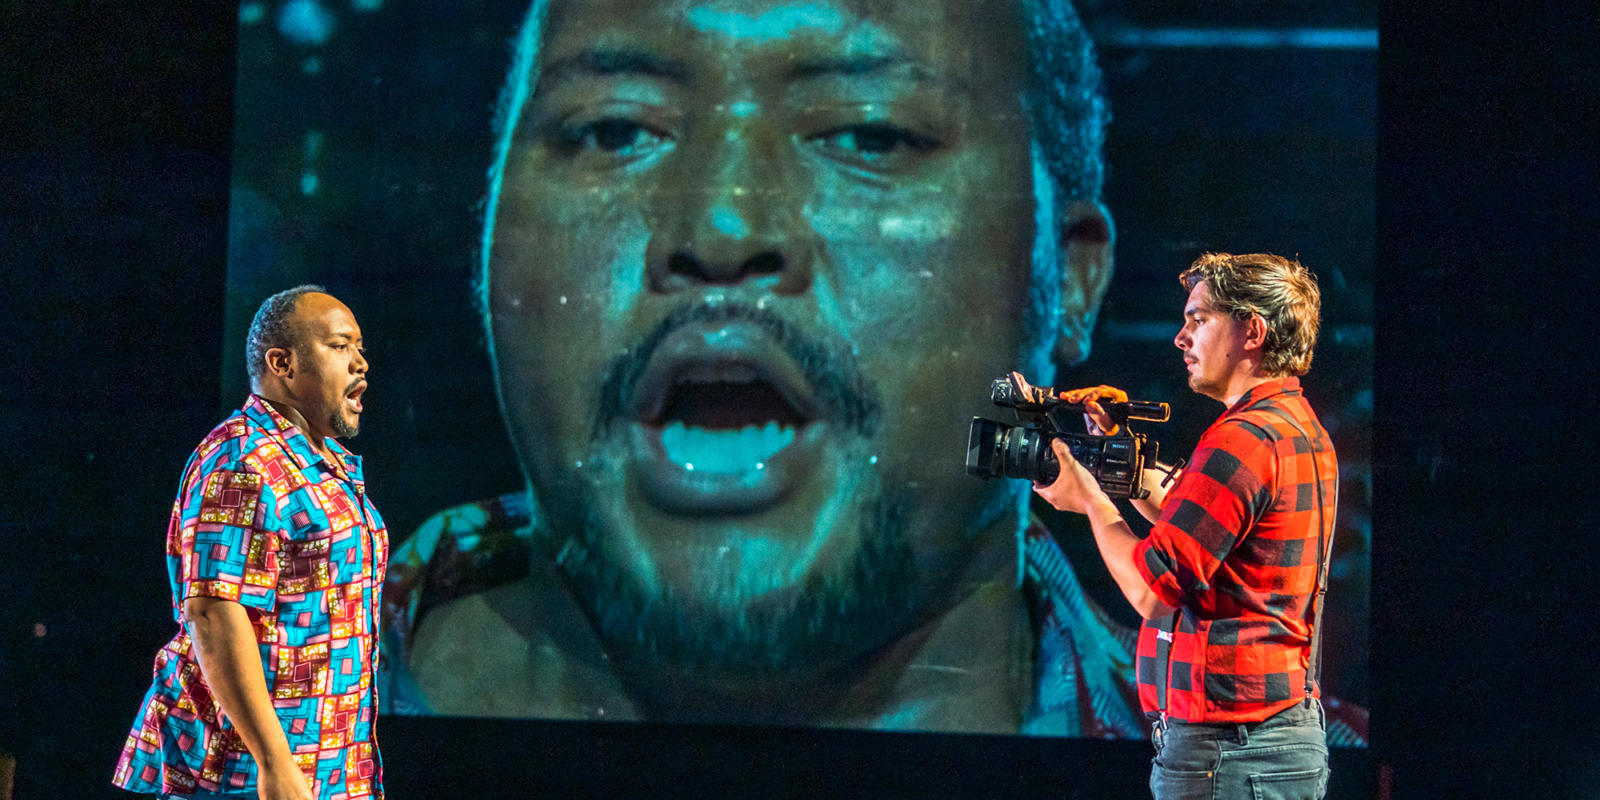 a man singing at a camera man on stage, a projection of the screen is behind them